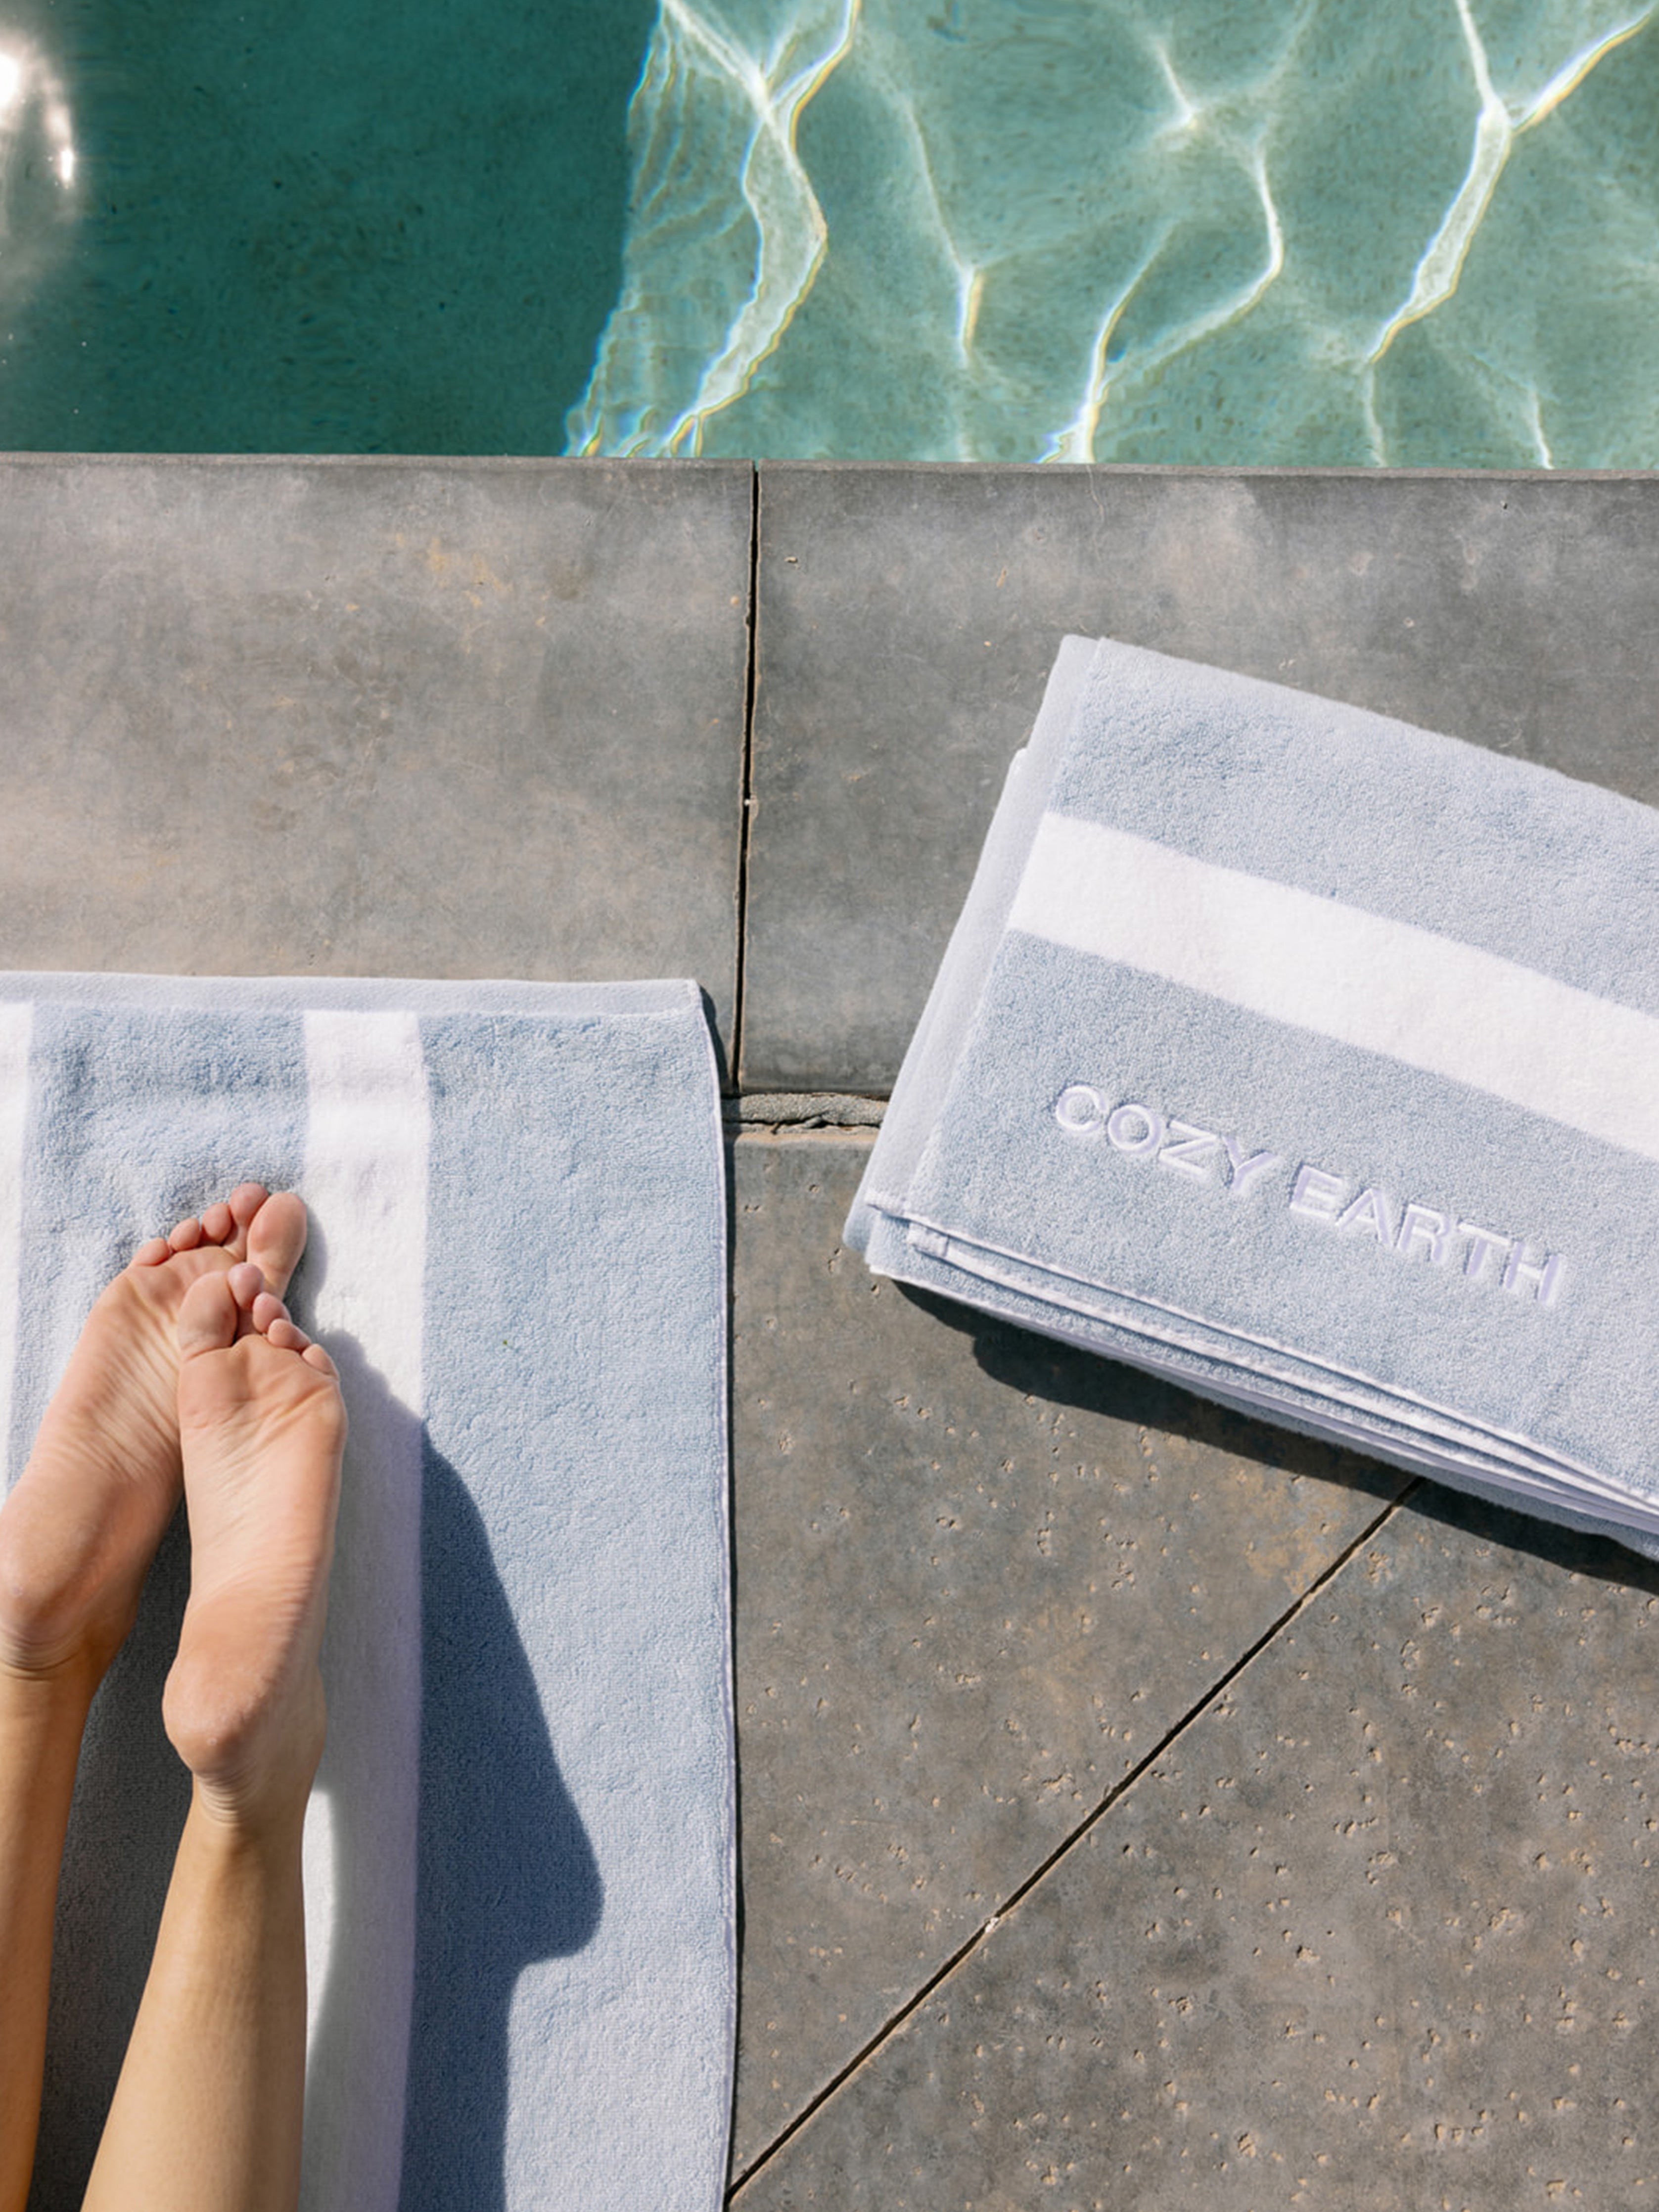 Two Cozy Earth breeze resort towels next to the pool |Color:Breeze